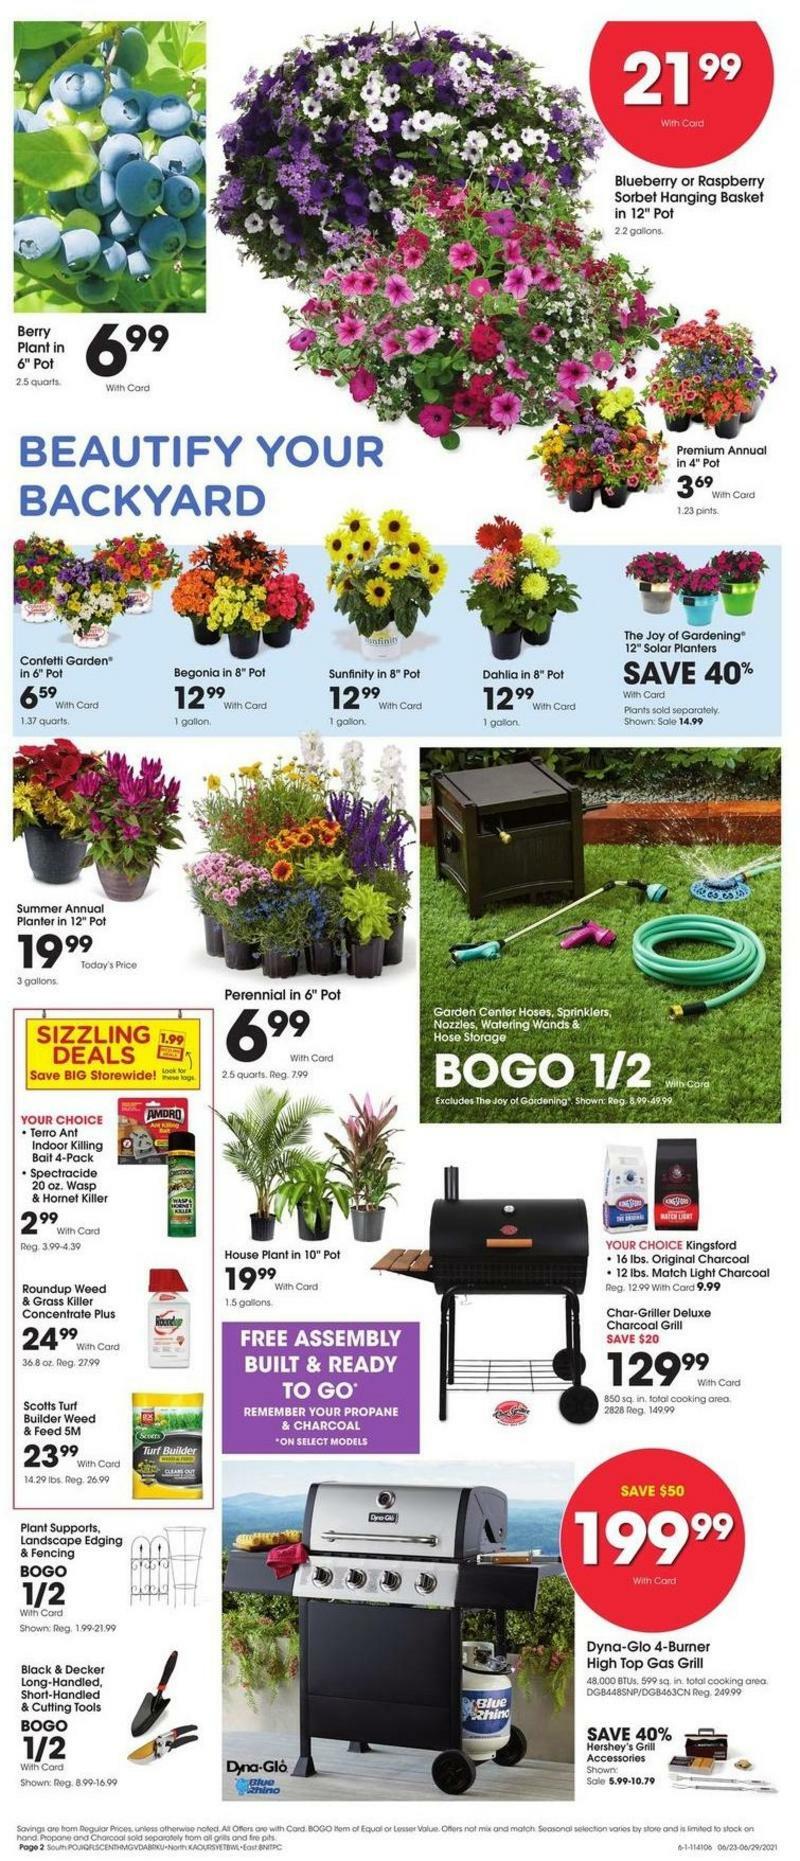 Fred Meyer General Merchandise Weekly Ad from June 23